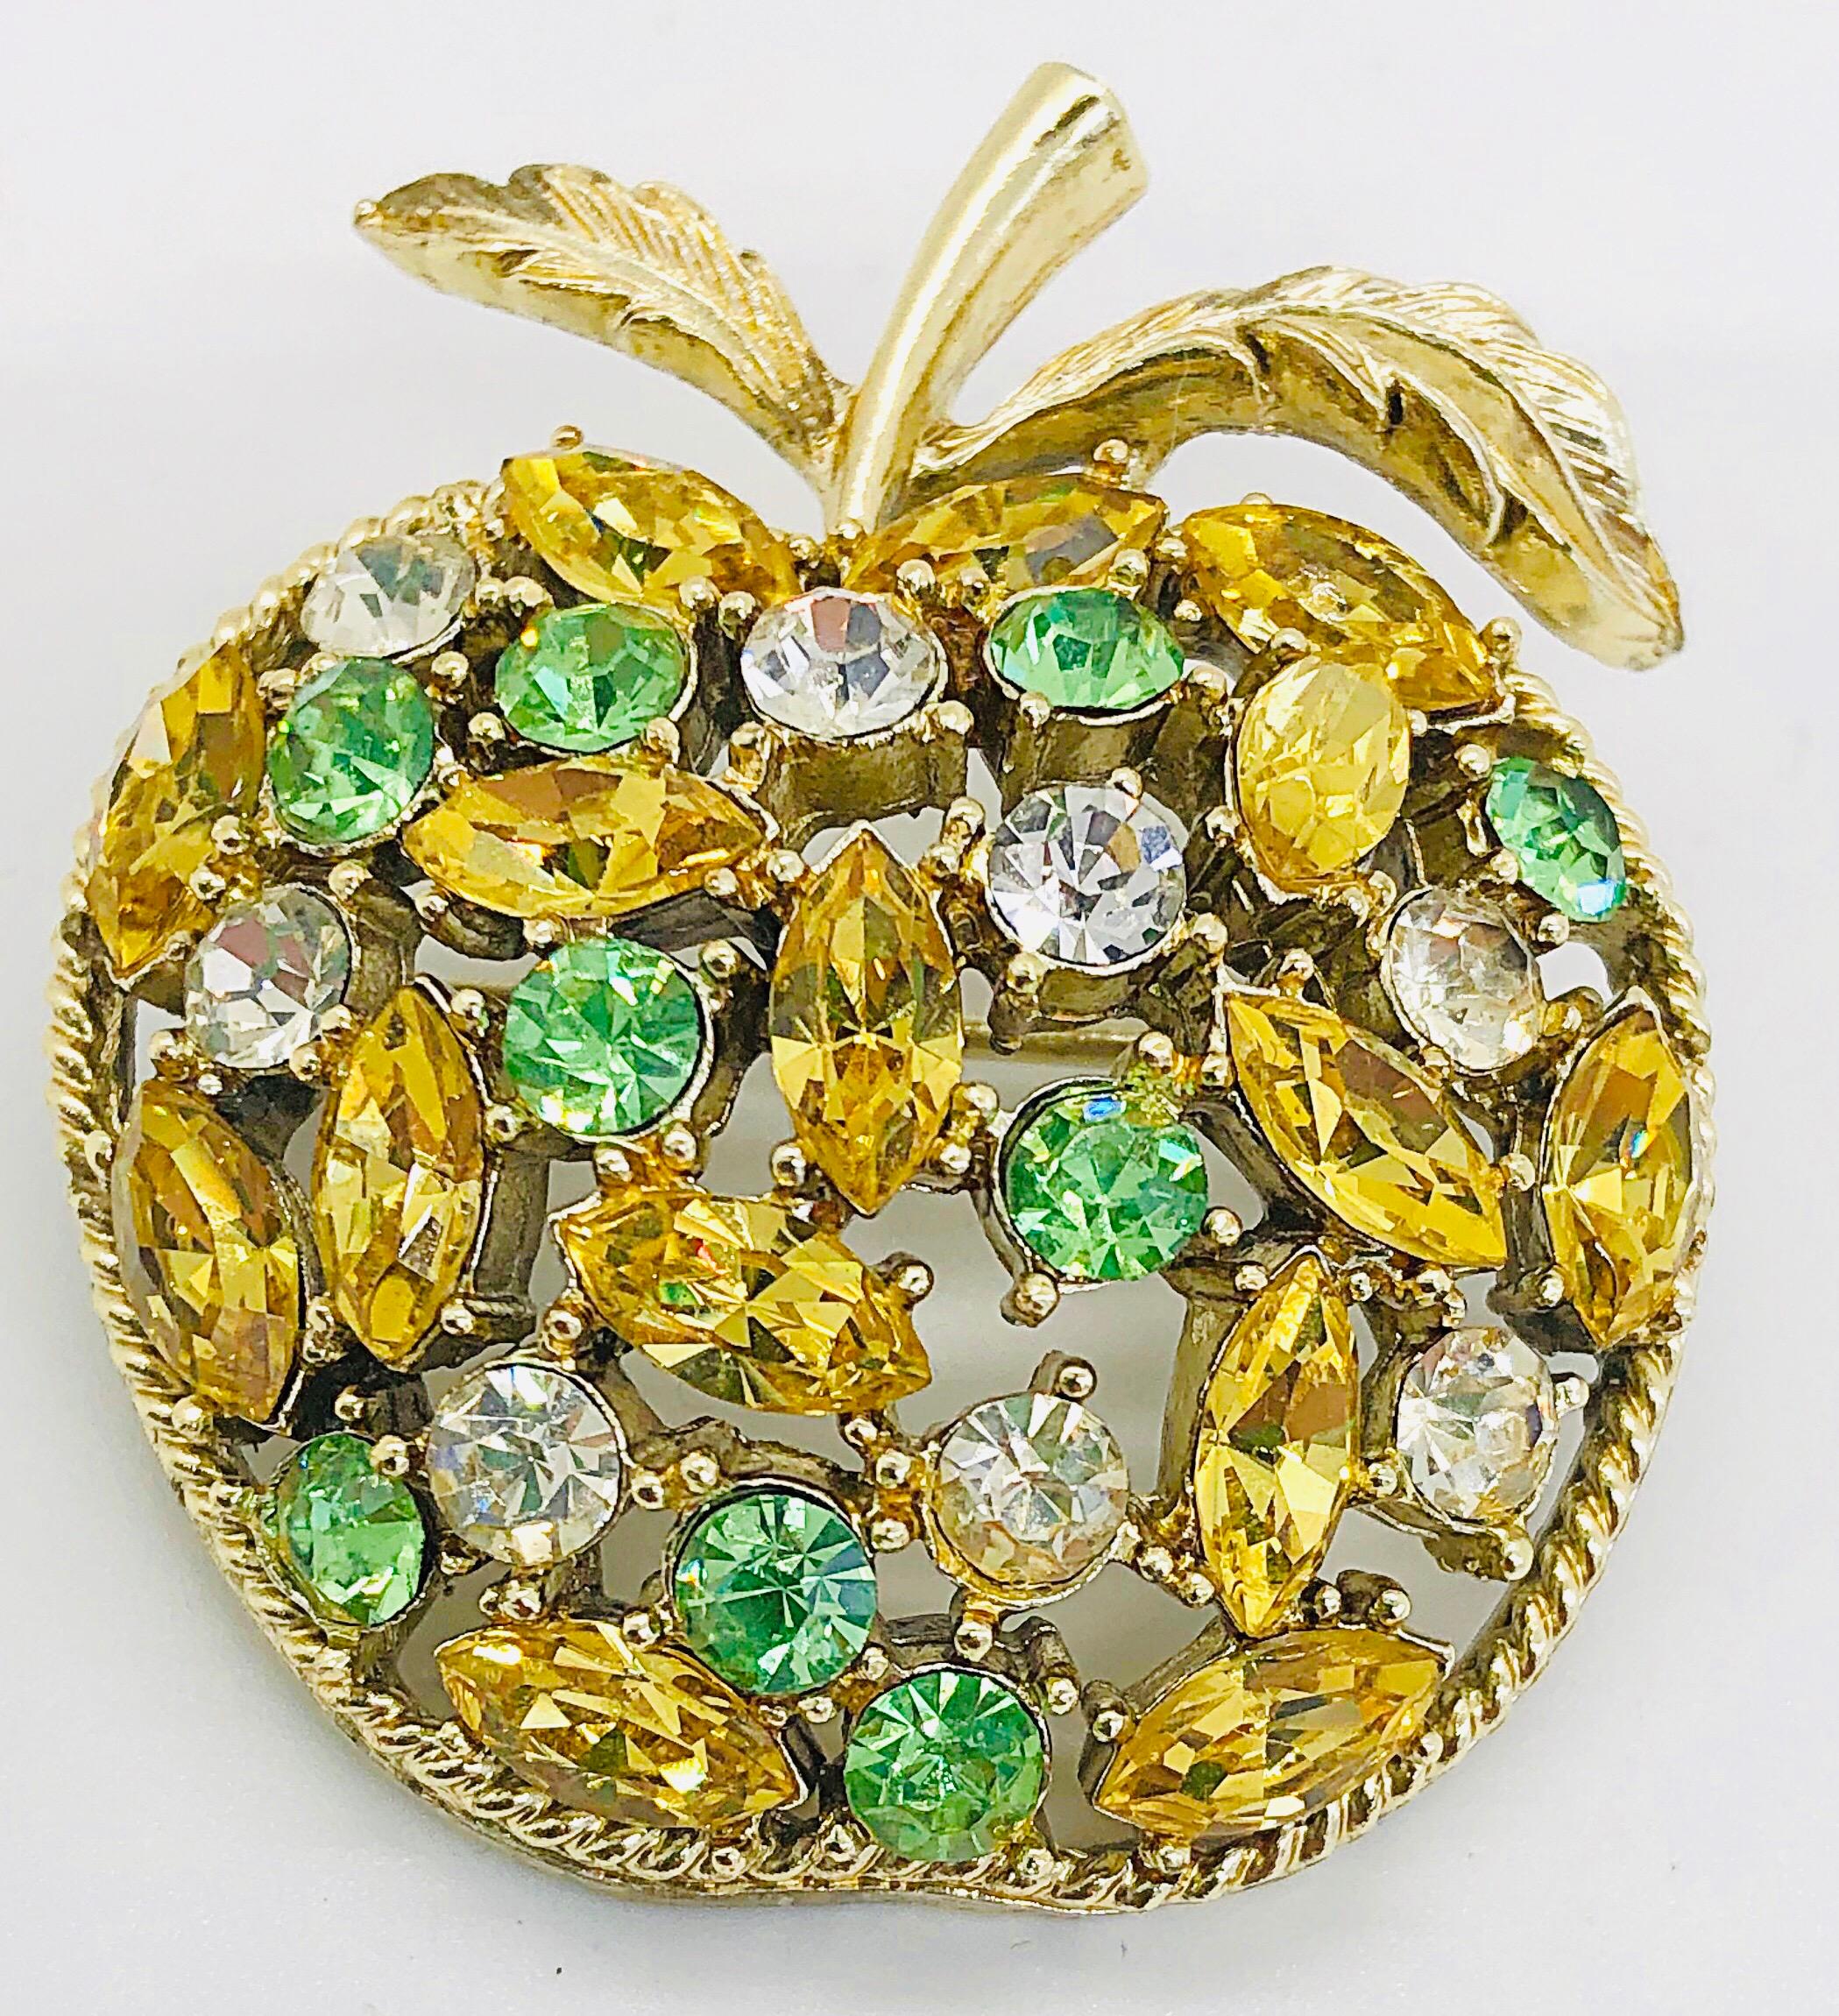 who voices the apple brooch